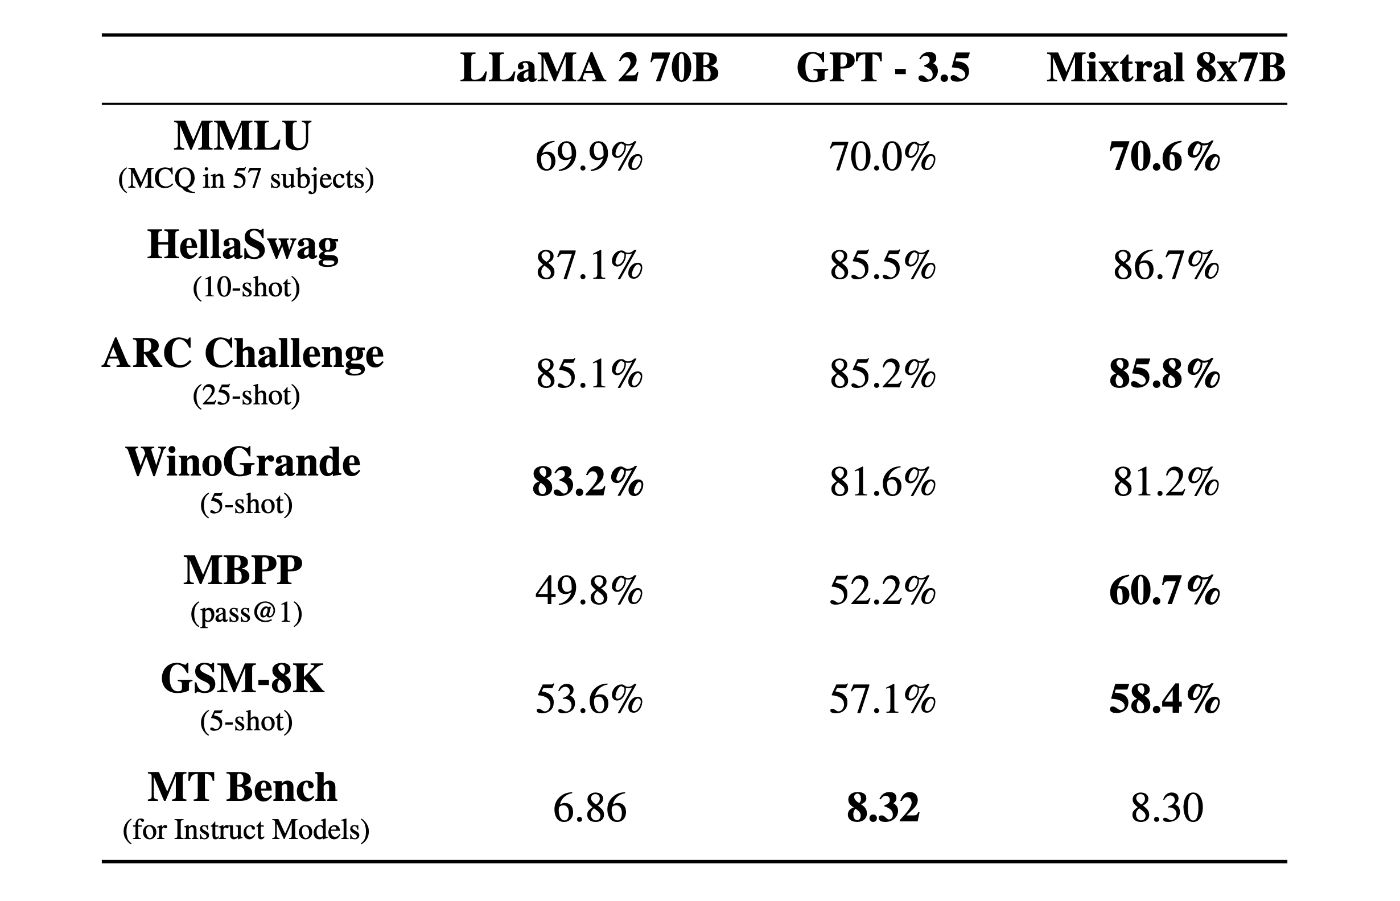 Comparison between Mistral, LLaMA, and GPT (from https://mistral.ai/news/mixtral-of-experts)